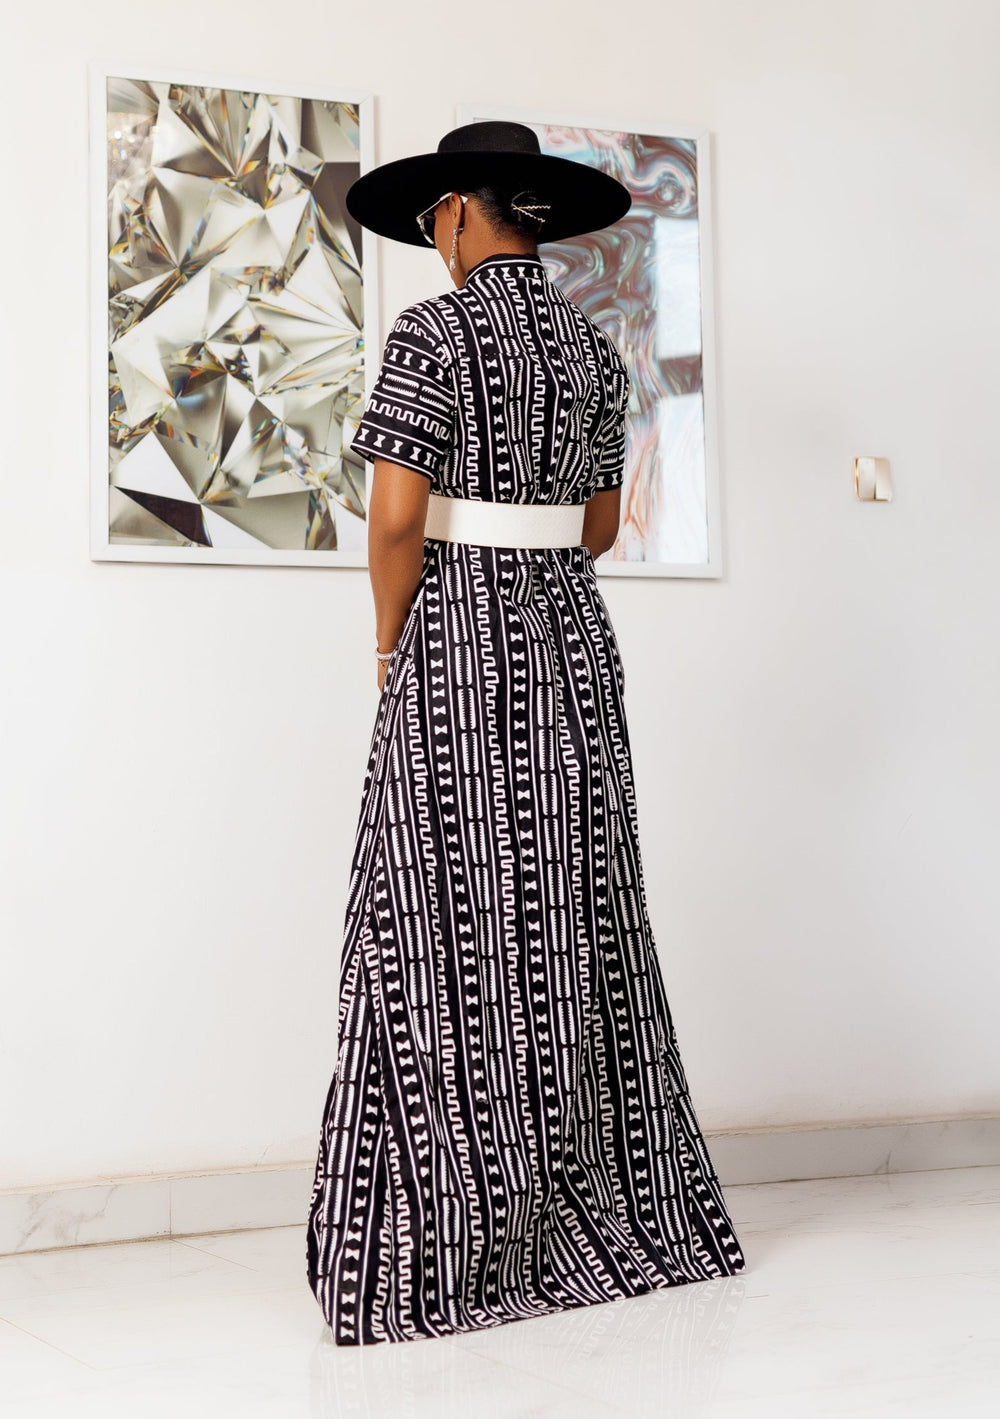 A woman posing in a black and white African print maxi kimono dress.